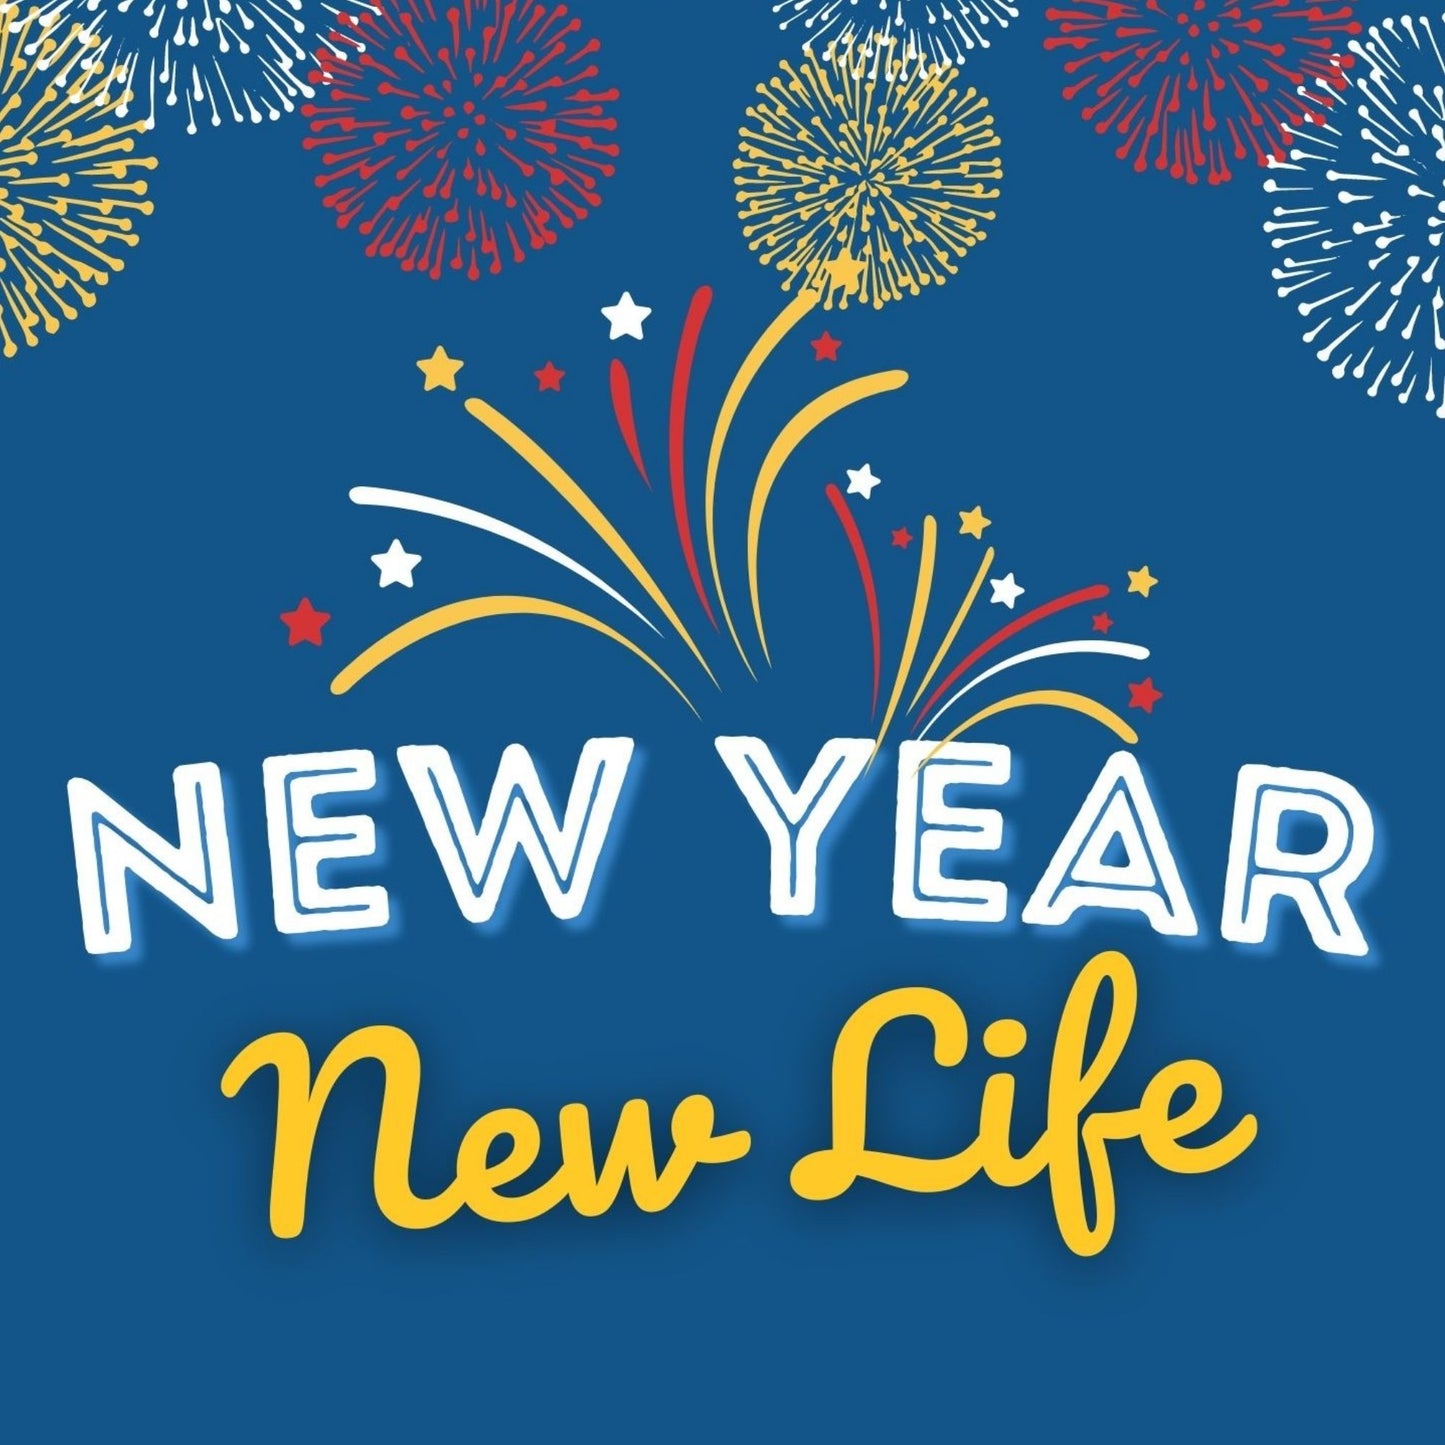 New Year New Life - 4-Week Bible Lessons for ages 5-12